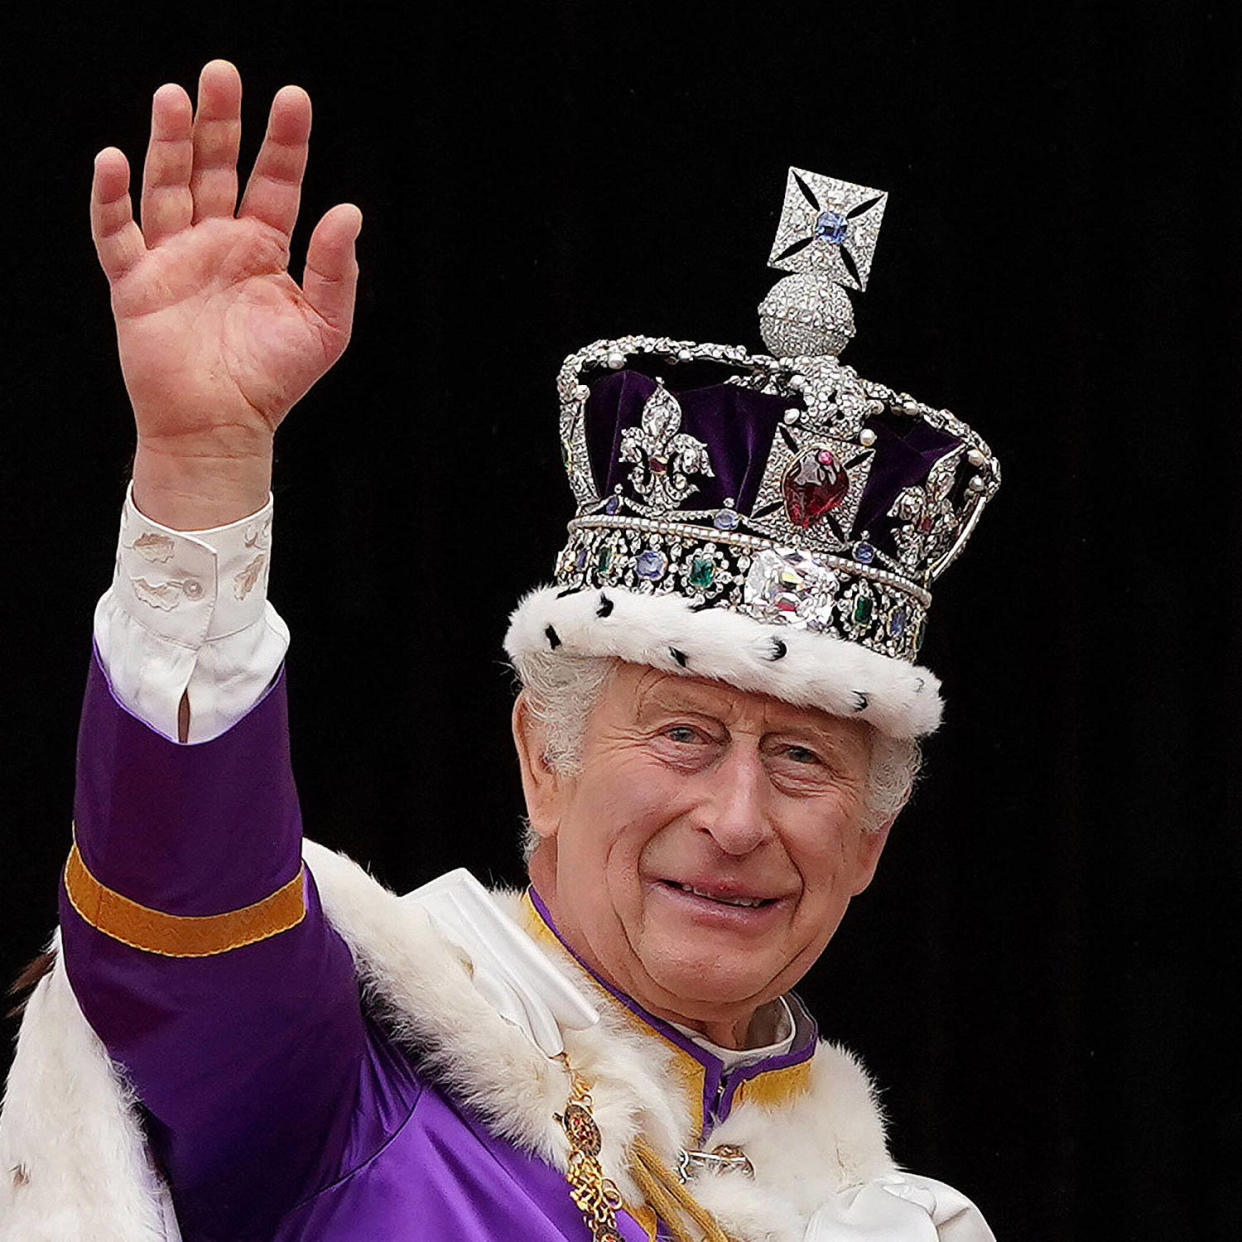 King Charles III's coronation in May 2023. (Stefan Rousseau / AFP via Getty Images)